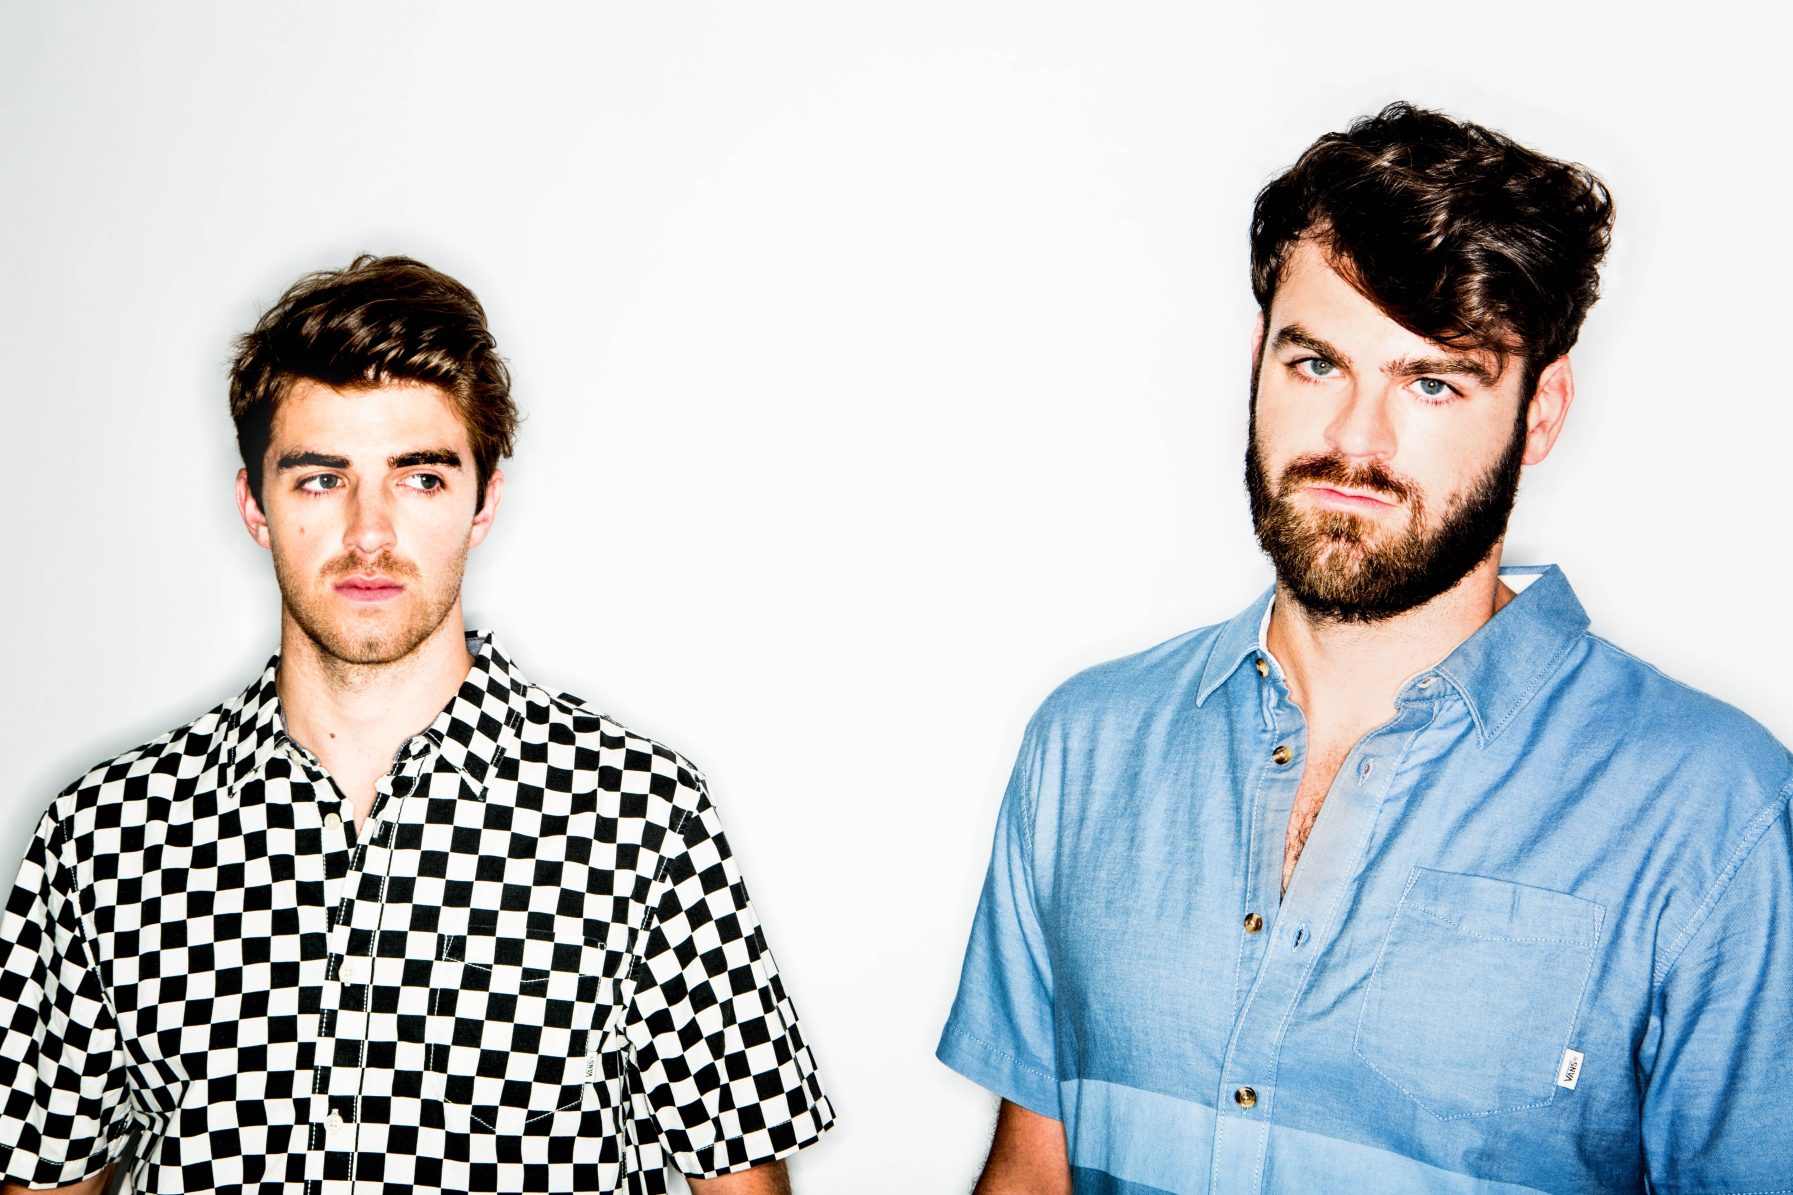 Defying Musical Conventions The Chainsmokers Will Play The FirstEver